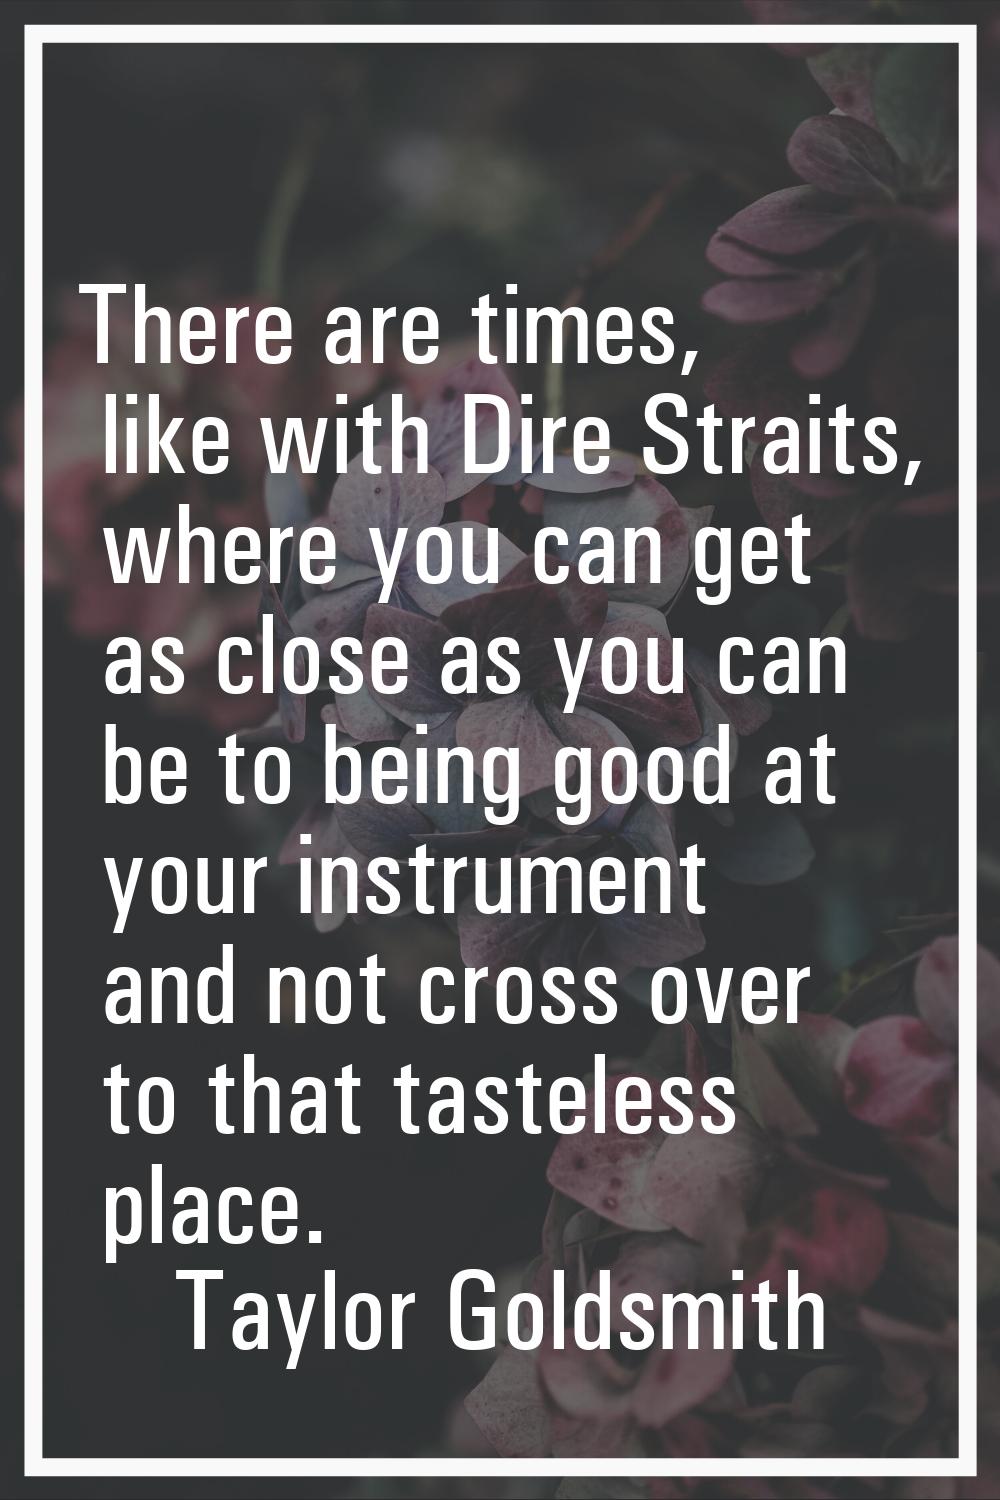 There are times, like with Dire Straits, where you can get as close as you can be to being good at 